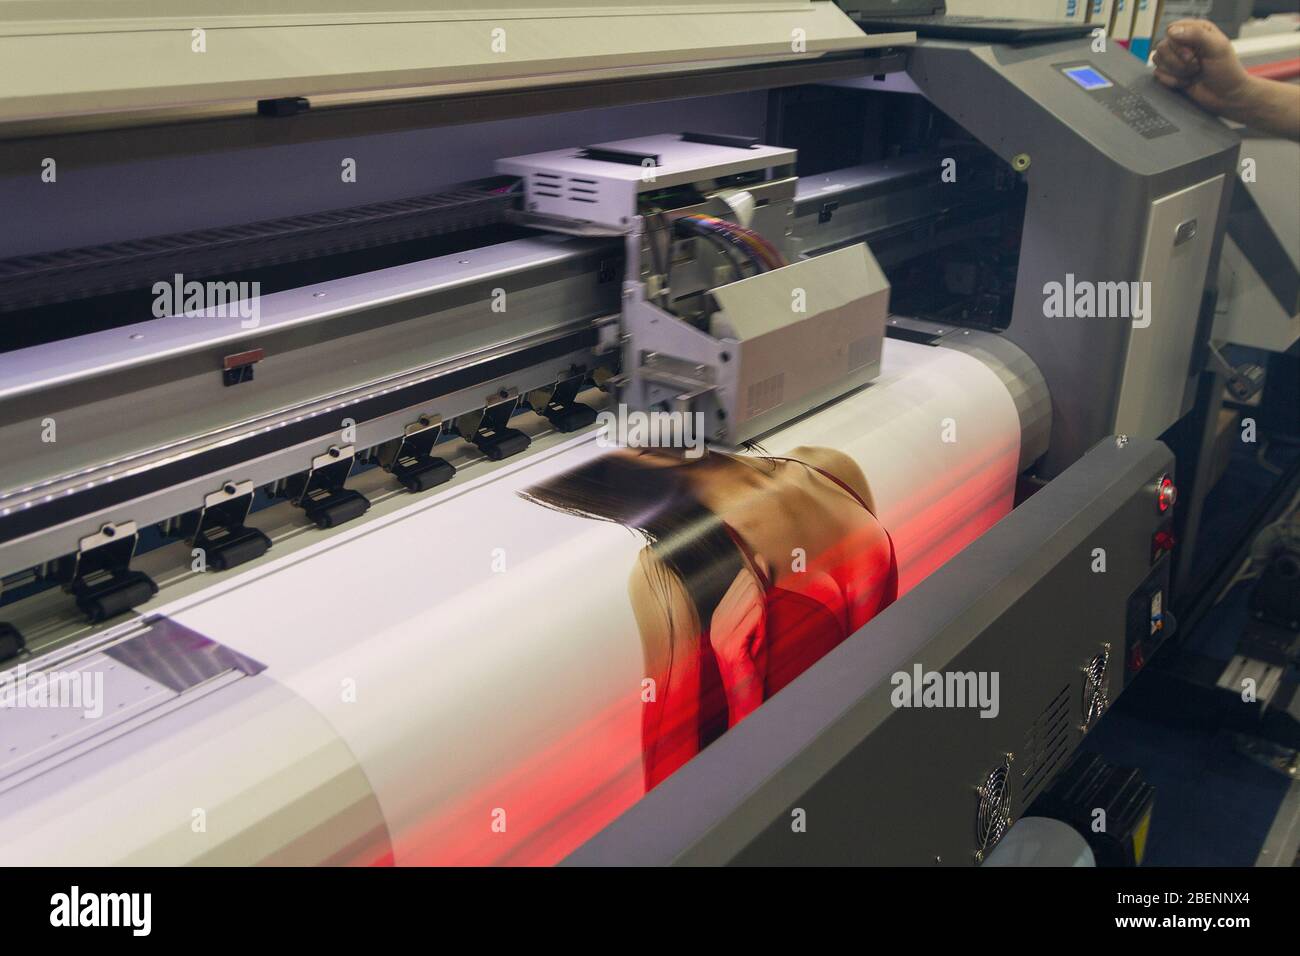 Large format printing machine in operation. Industry Stock Photo